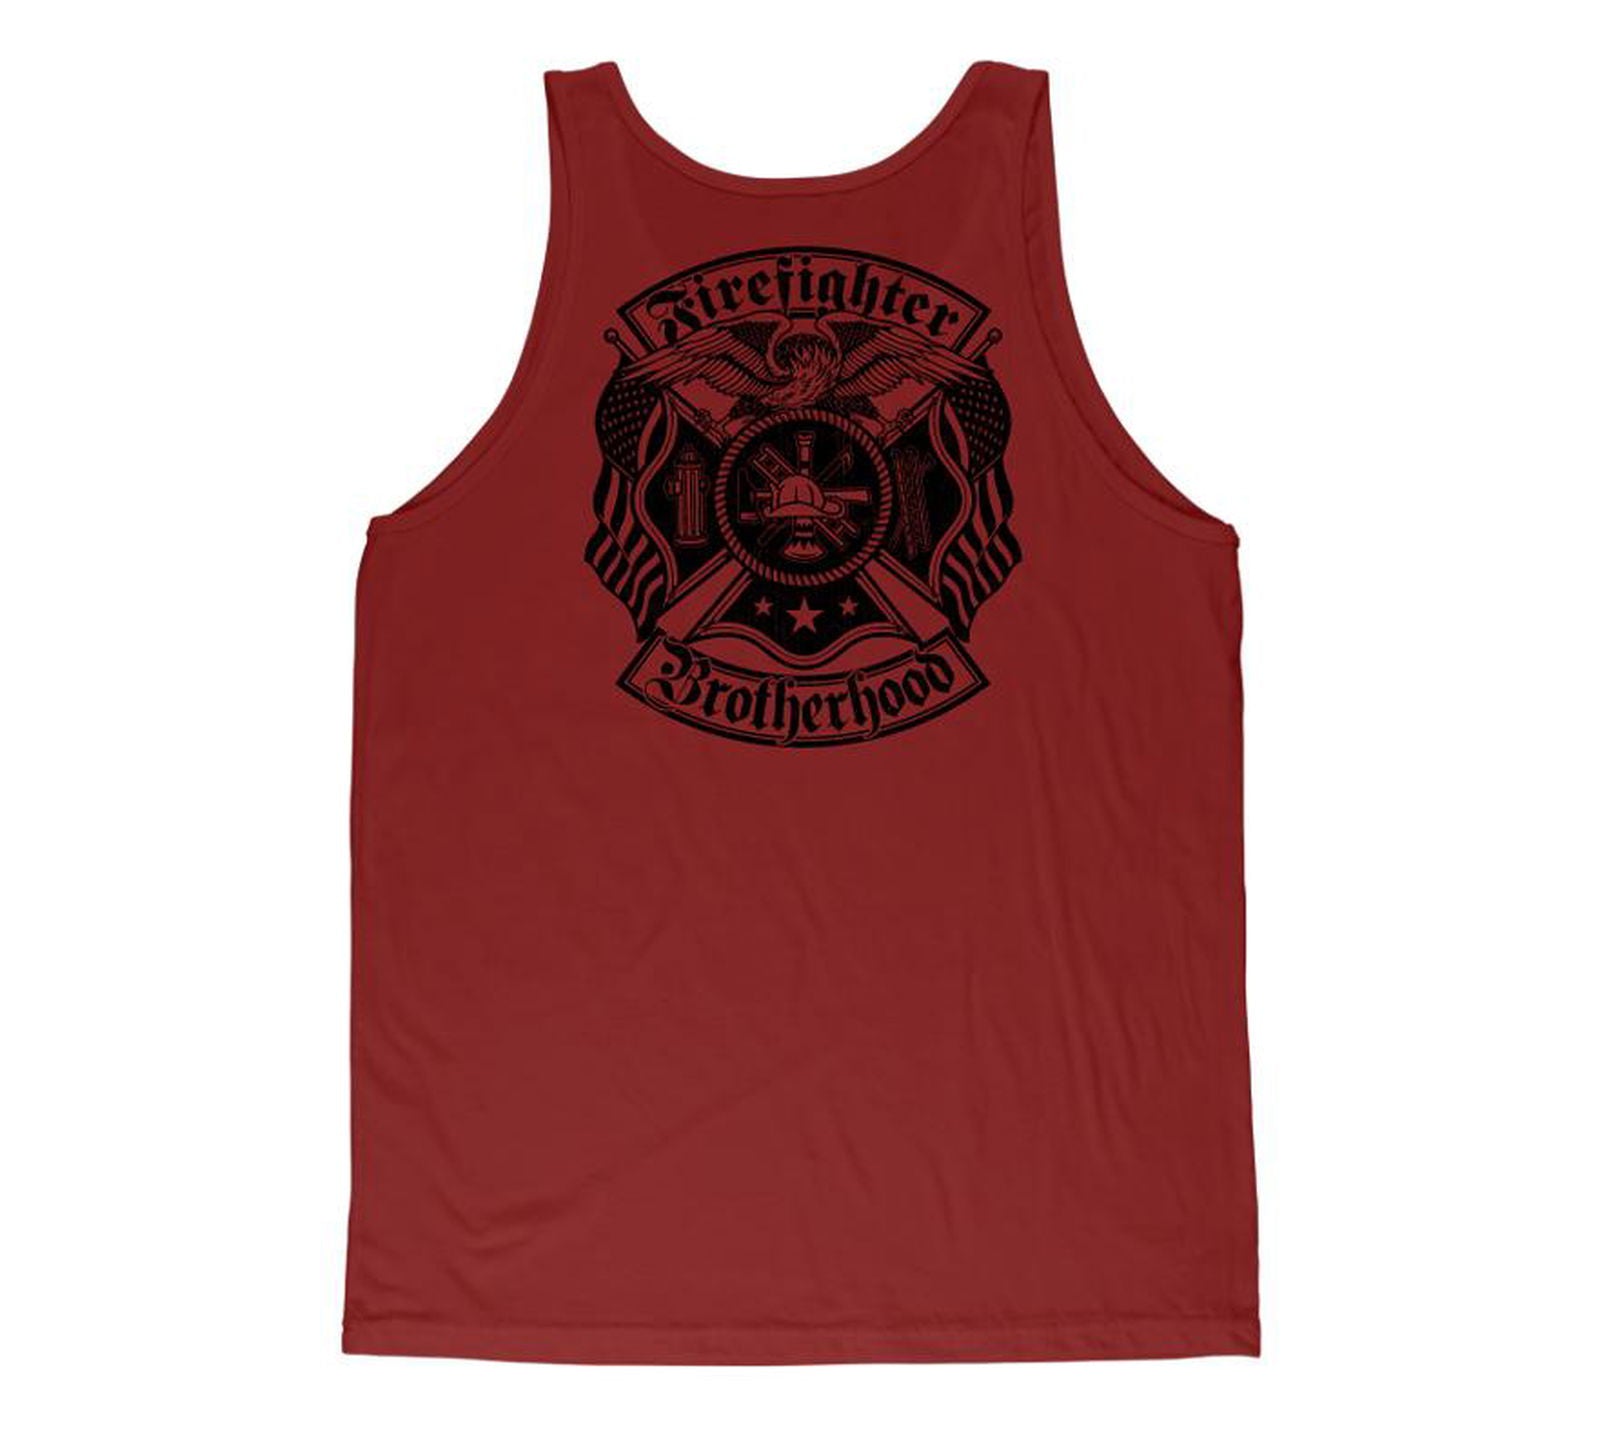 Fire Crest - Howitzer Clothing